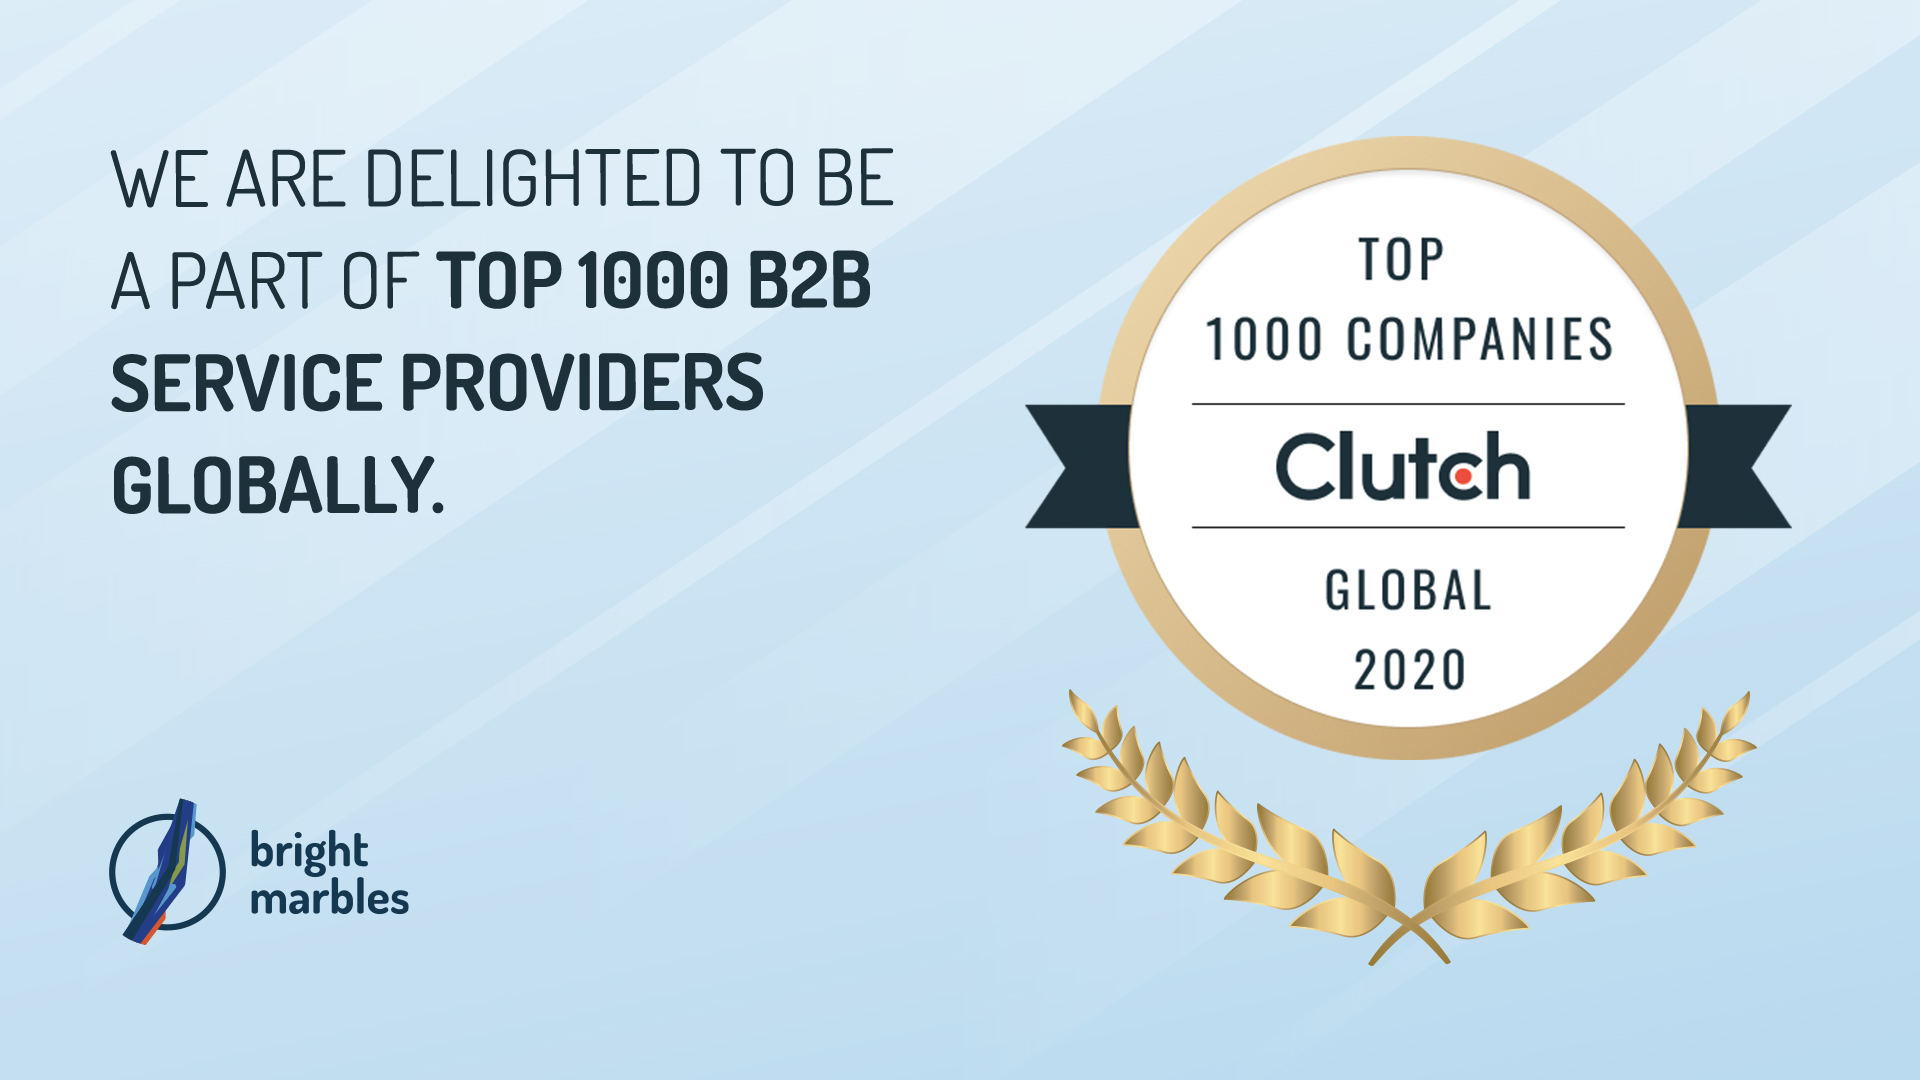 Top 1000 companies by Clutch